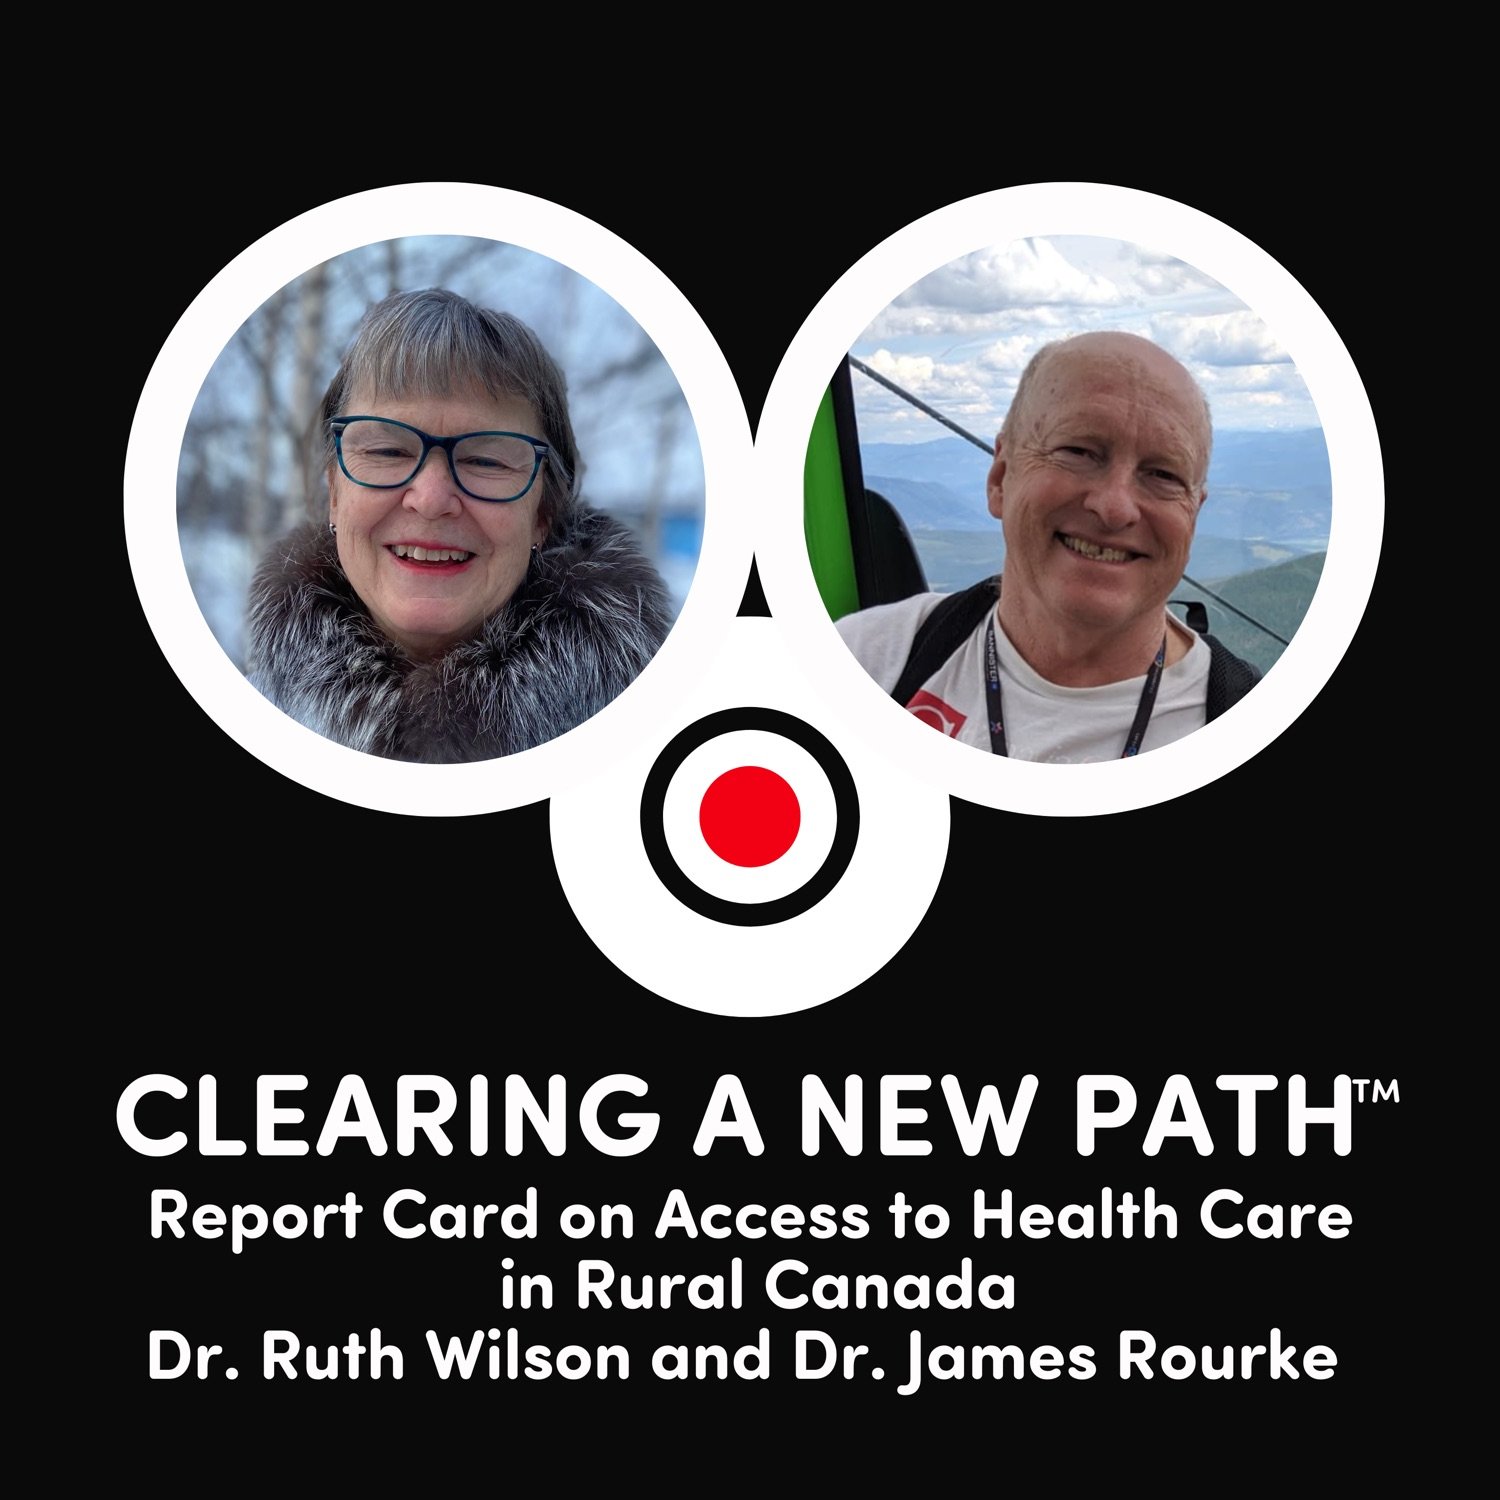 A Report on Access to Health Care in Rural Canada - Dr. Ruth Wilson and Dr. James Rourke